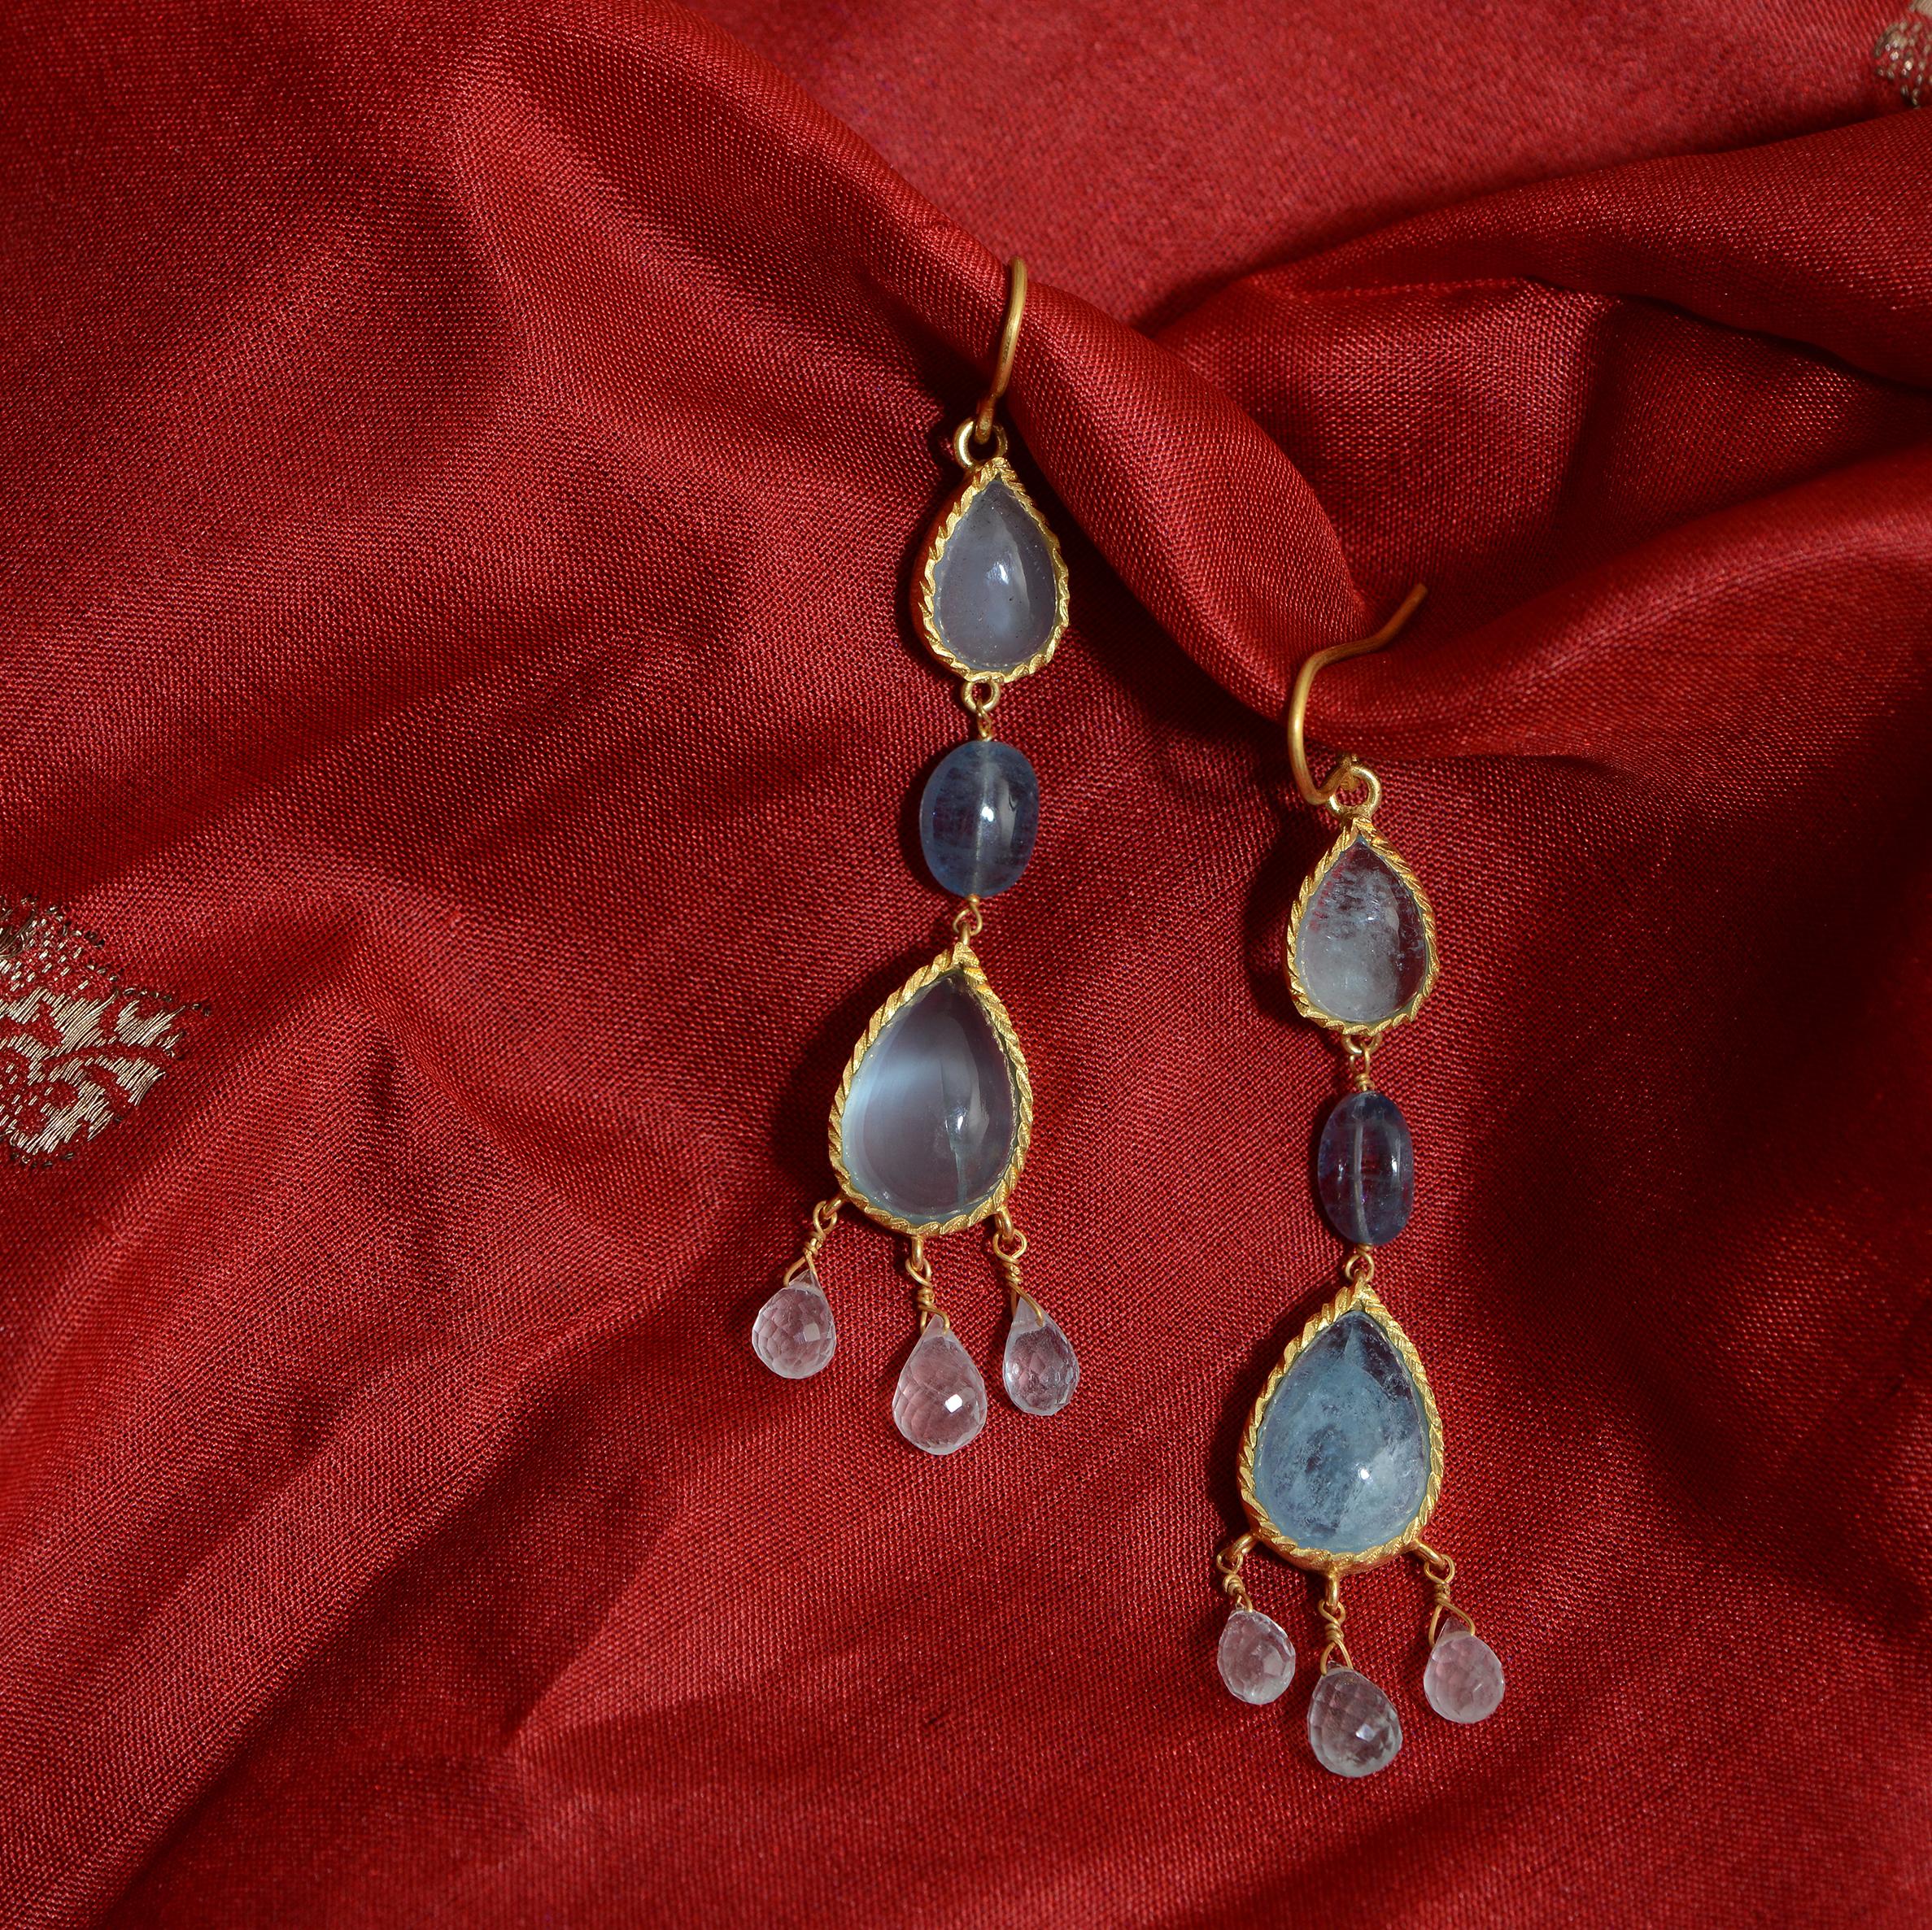 These stunning aquamarine cabochon teardrop earrings are from a limited edition. They have been handmade in our workshops and have a matching pendant and ring. They are made in sterling silver coated with 24k gold plate.

This collection was